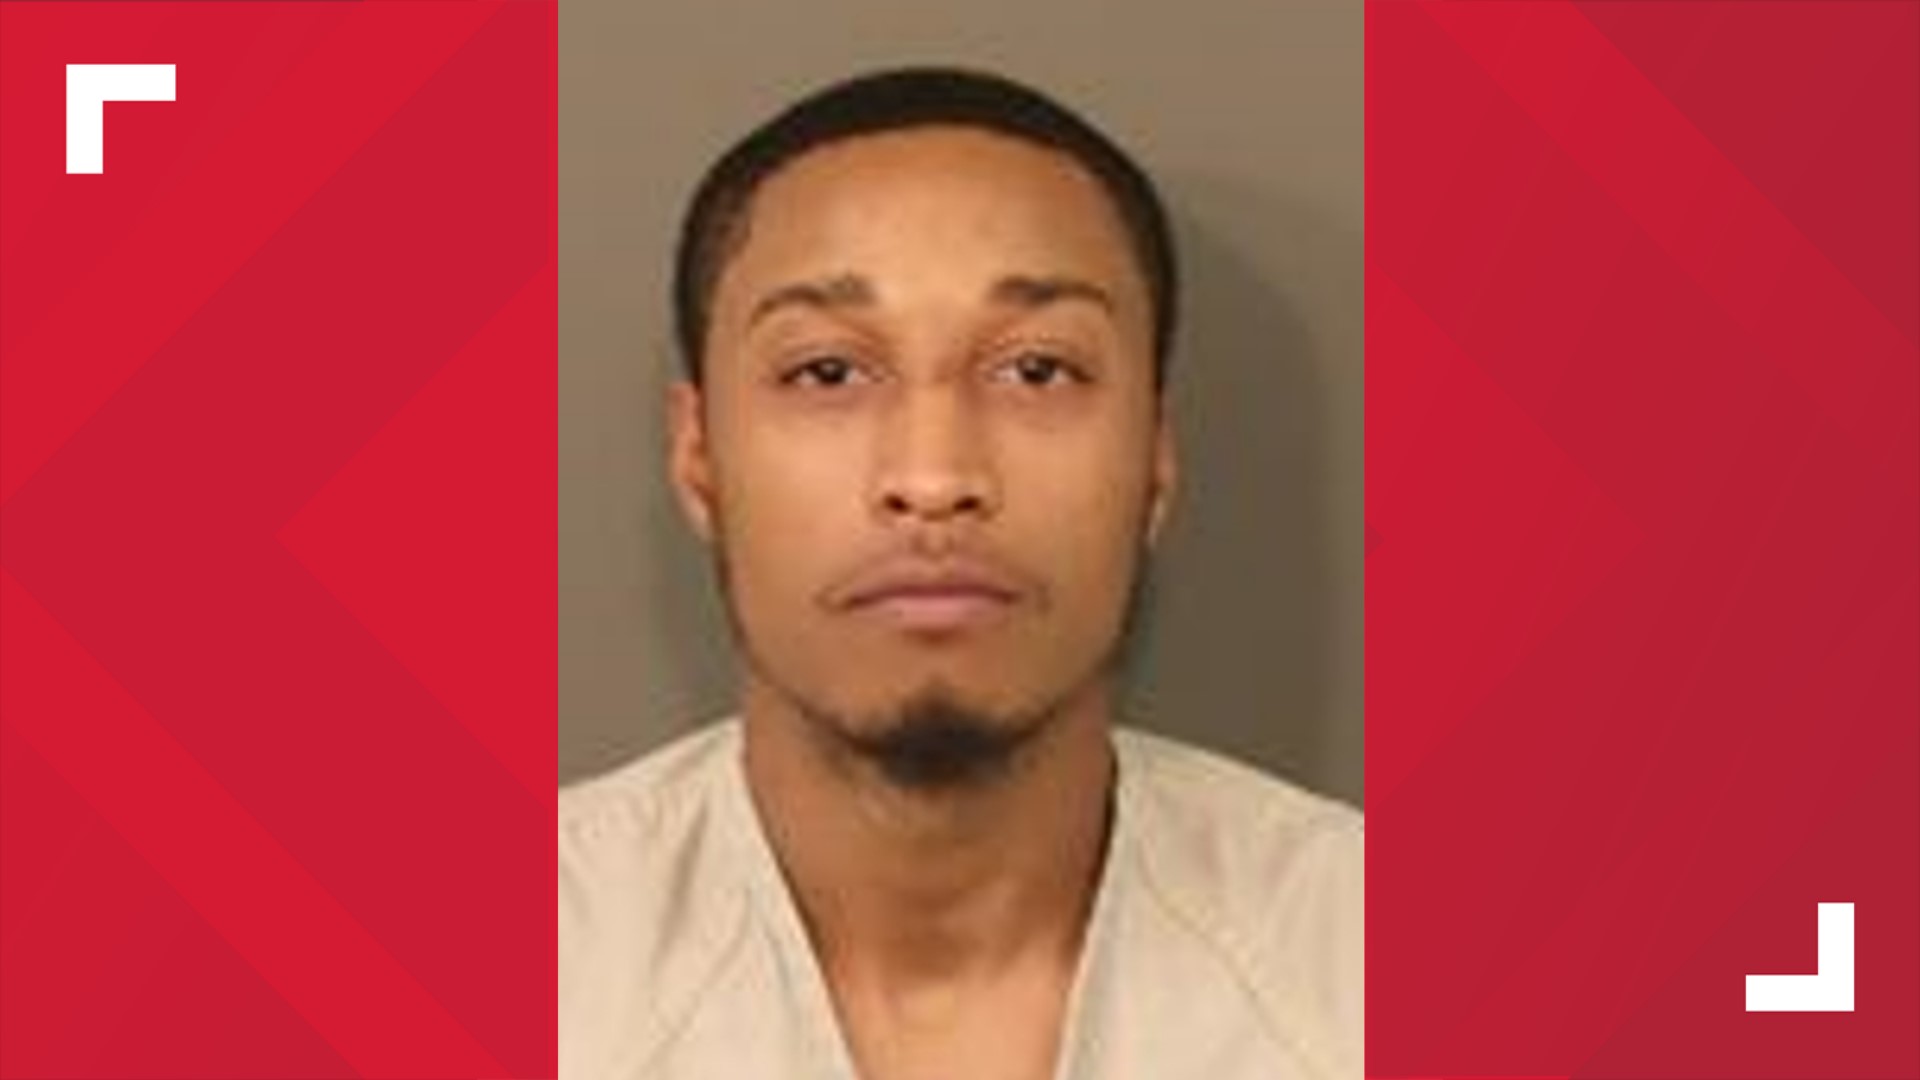 A 26-year-old man is charged with murder after court records state he admitted to his role in the fatal shooting of a 38-year-old man in the Linden area last month.